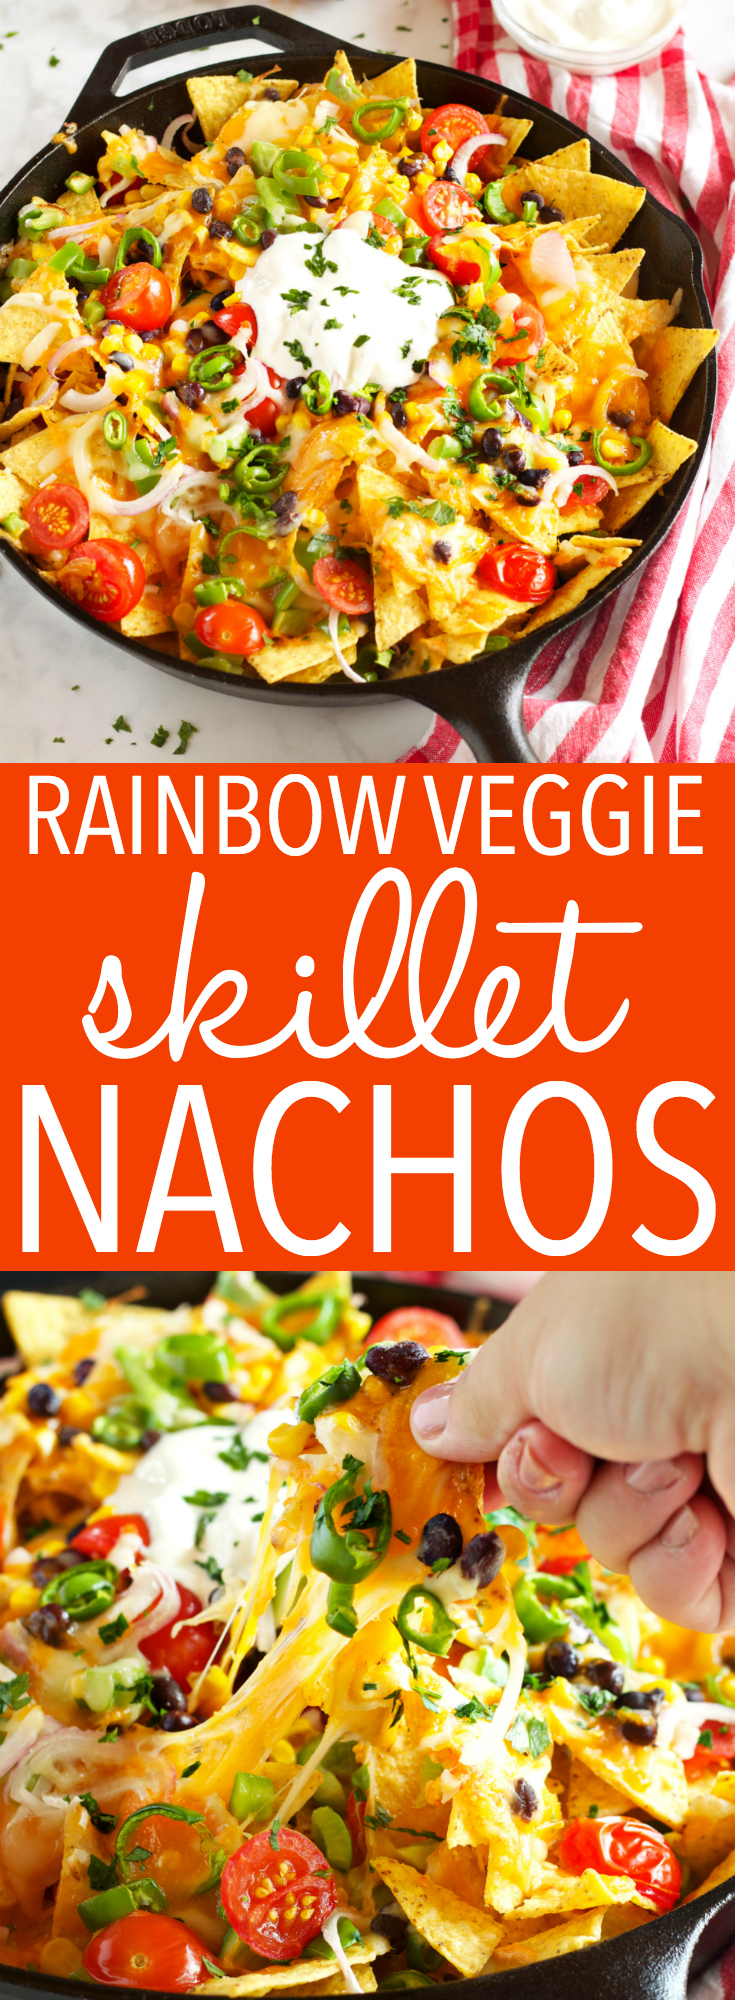 These Healthy Vegetarian Nachos with Rainbow Vegetables are the best healthier way to enjoy nachos! They're low in fat and packed with healthy veggies! Recipe from thebusybaker.ca! #healthynachos #vegetariannachos #veggienachos via @busybakerblog